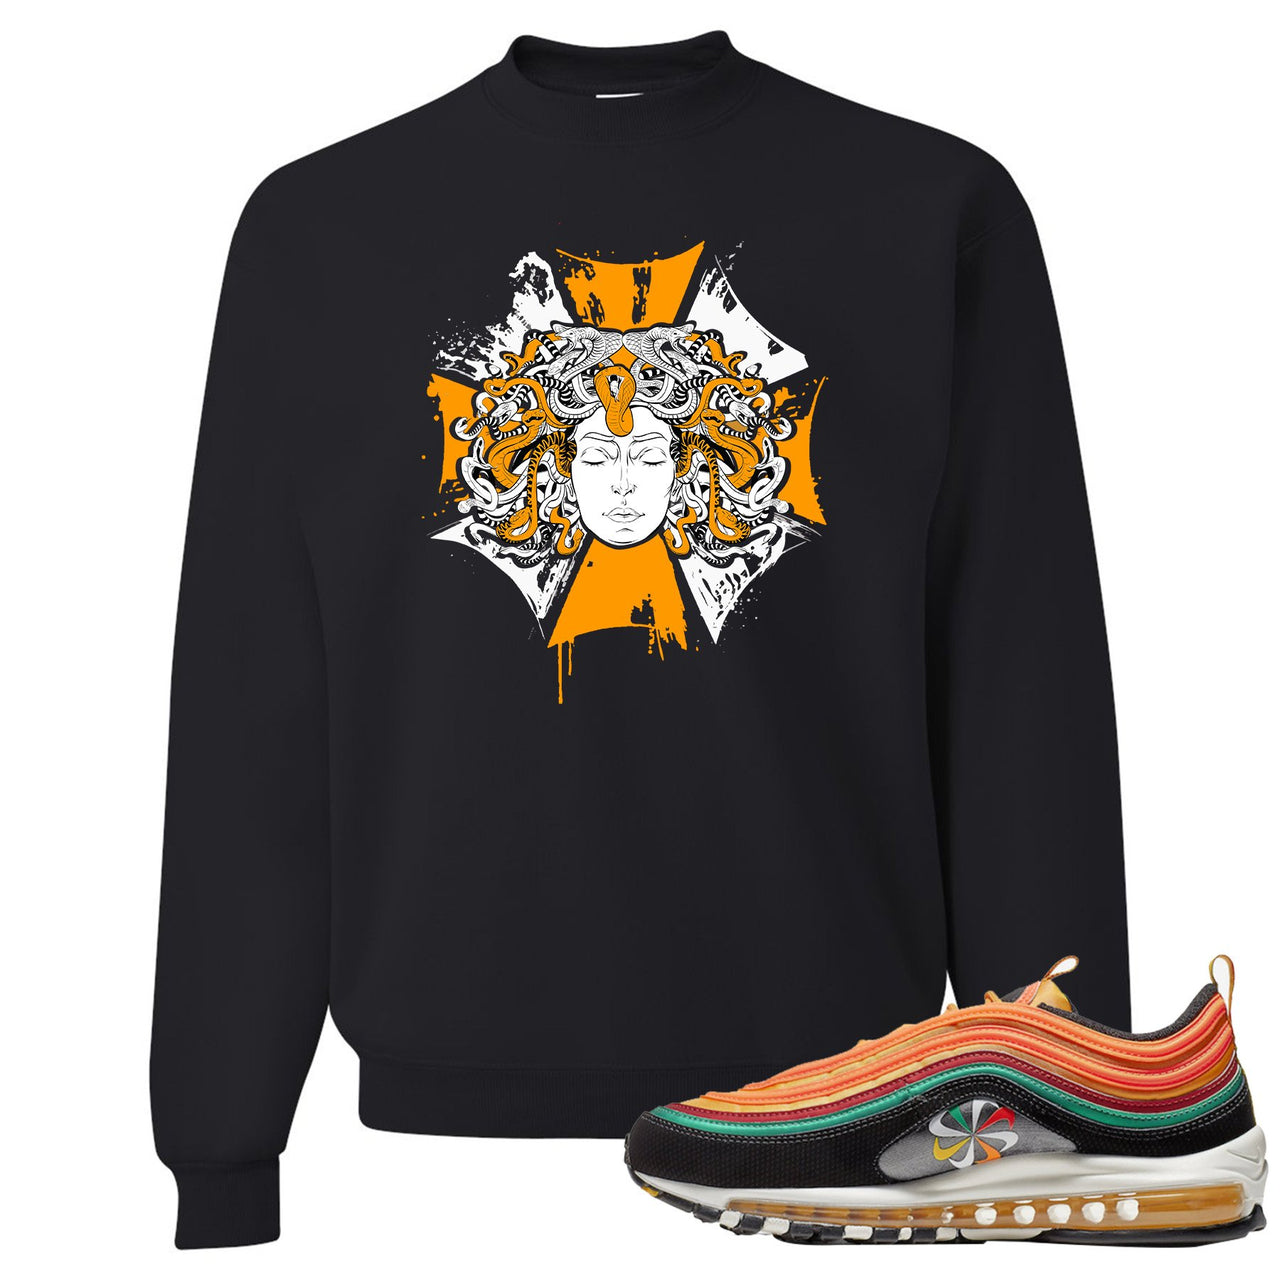 Printed on the front of the Air Max 97 Sunburst black sneaker matching crewneck sweatshirt is the Medusa logo